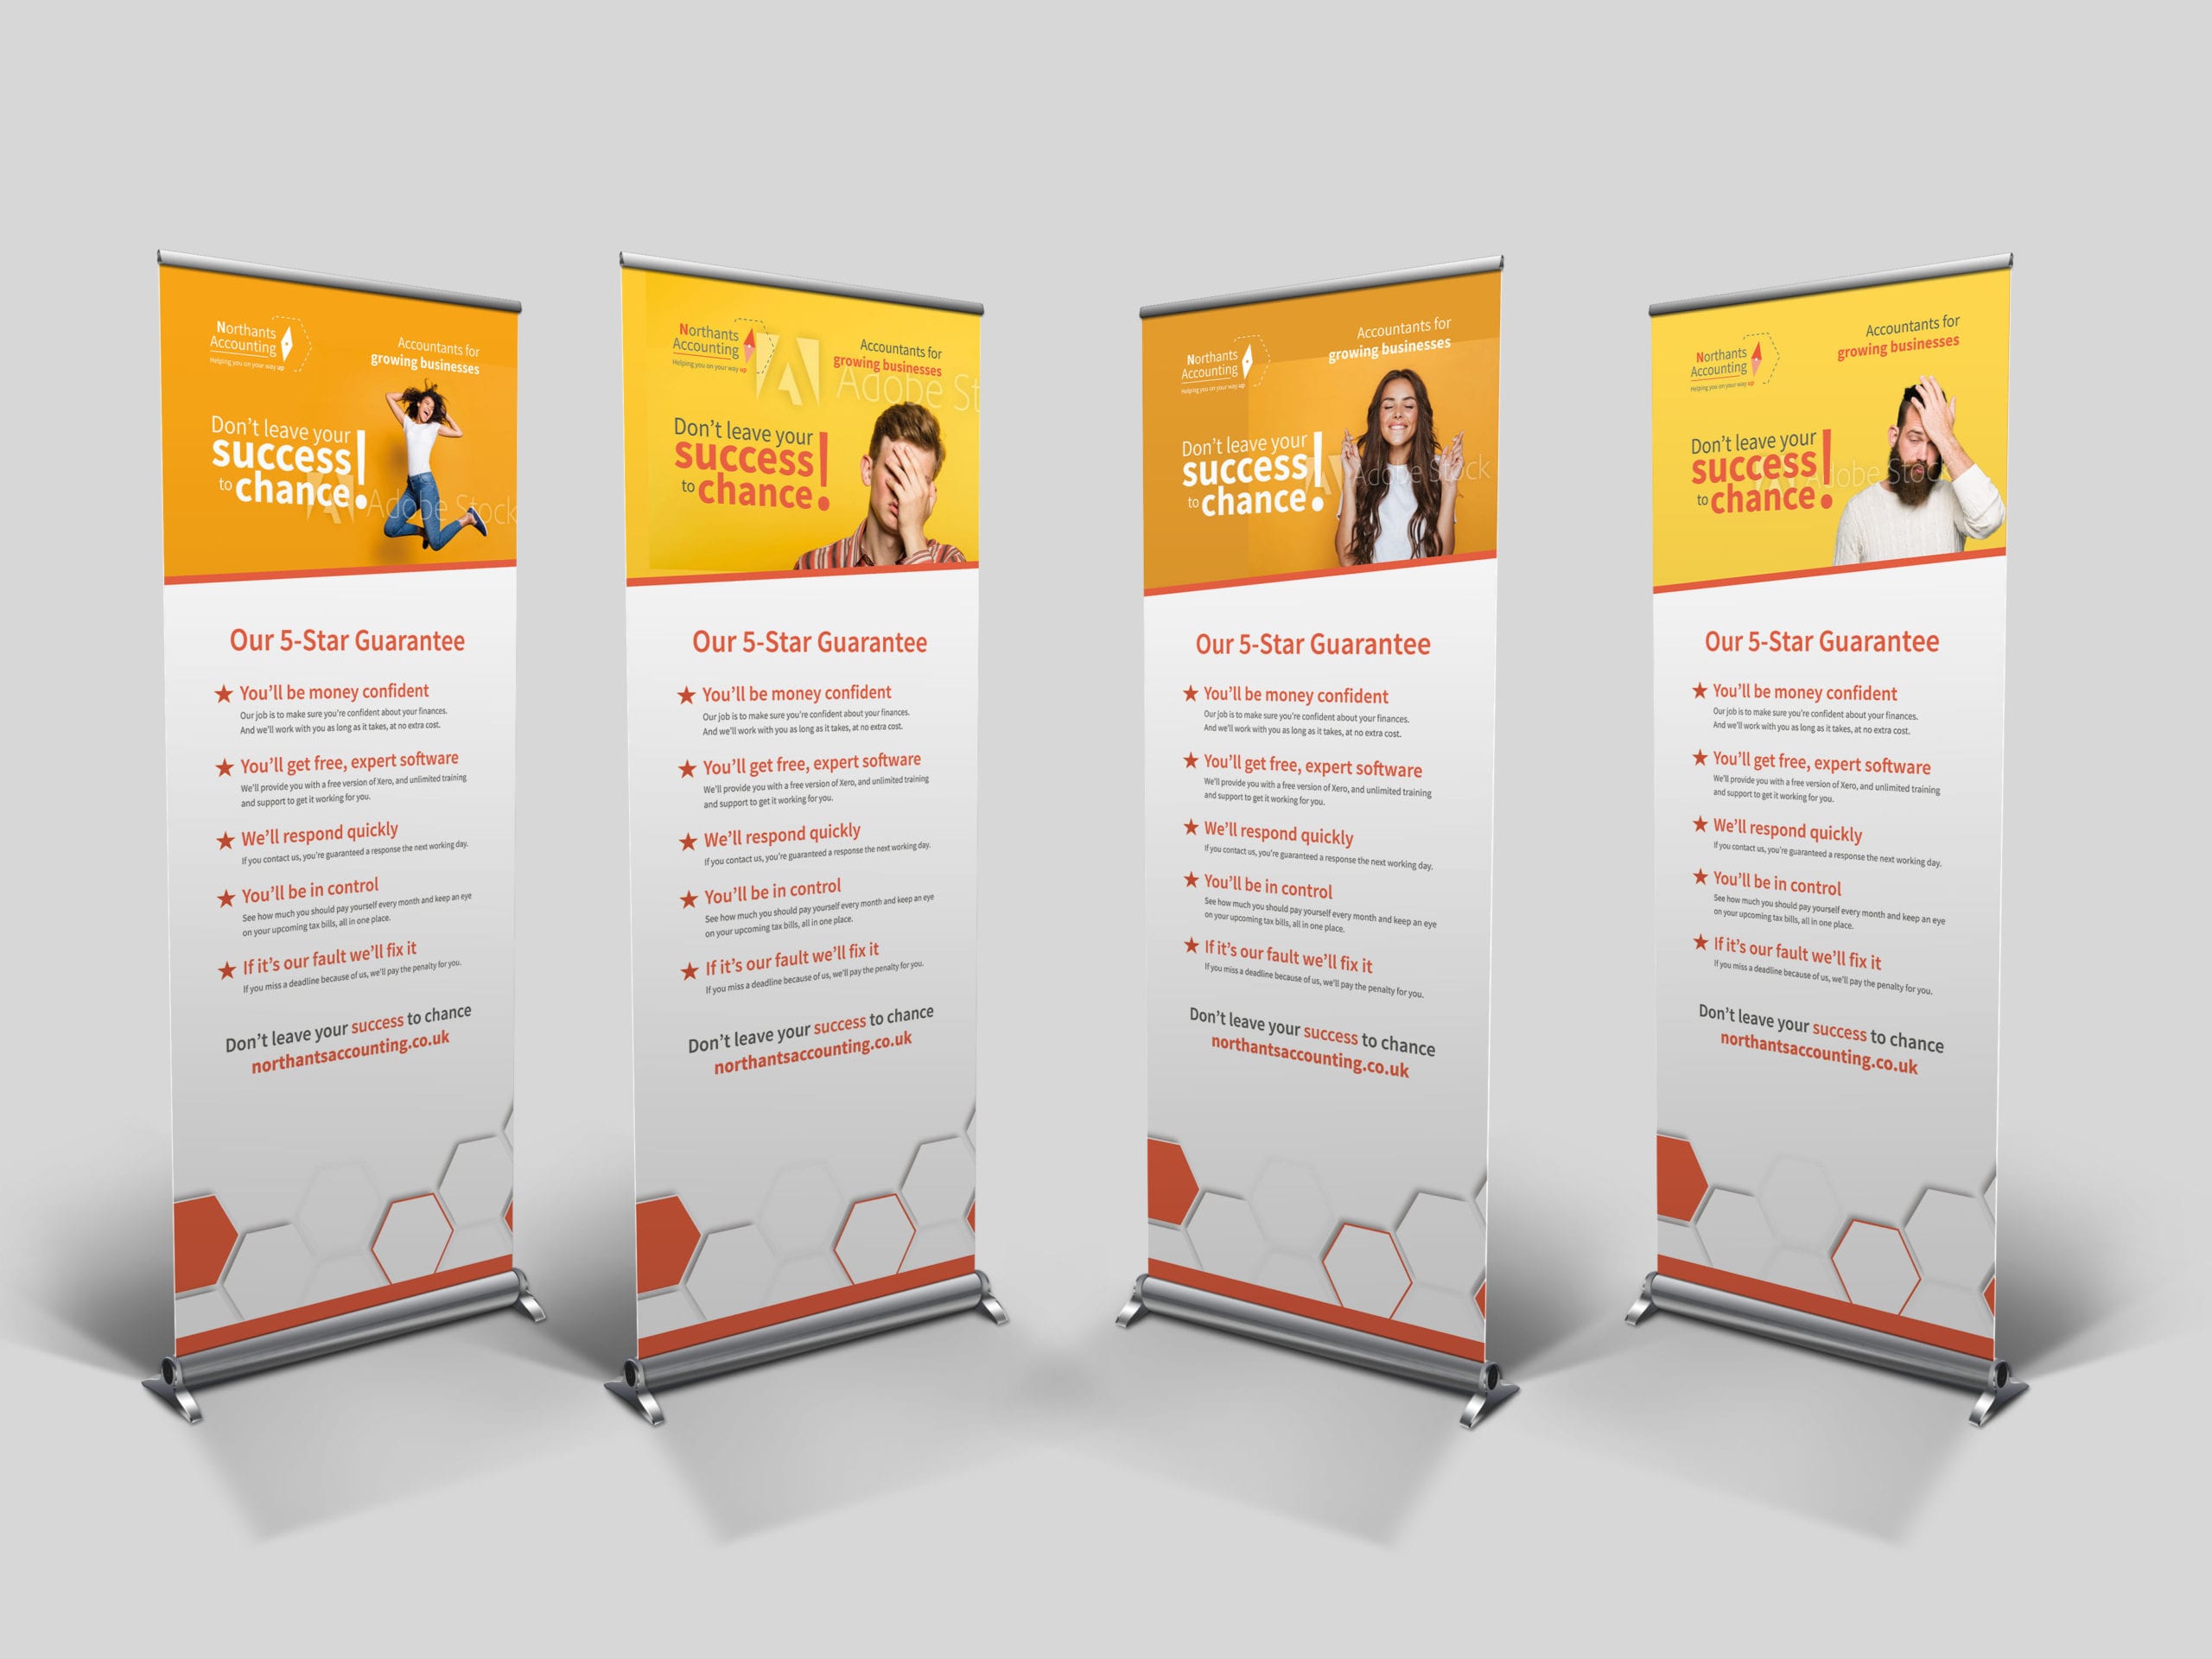 A roller banner design, with four different 'hero' image options